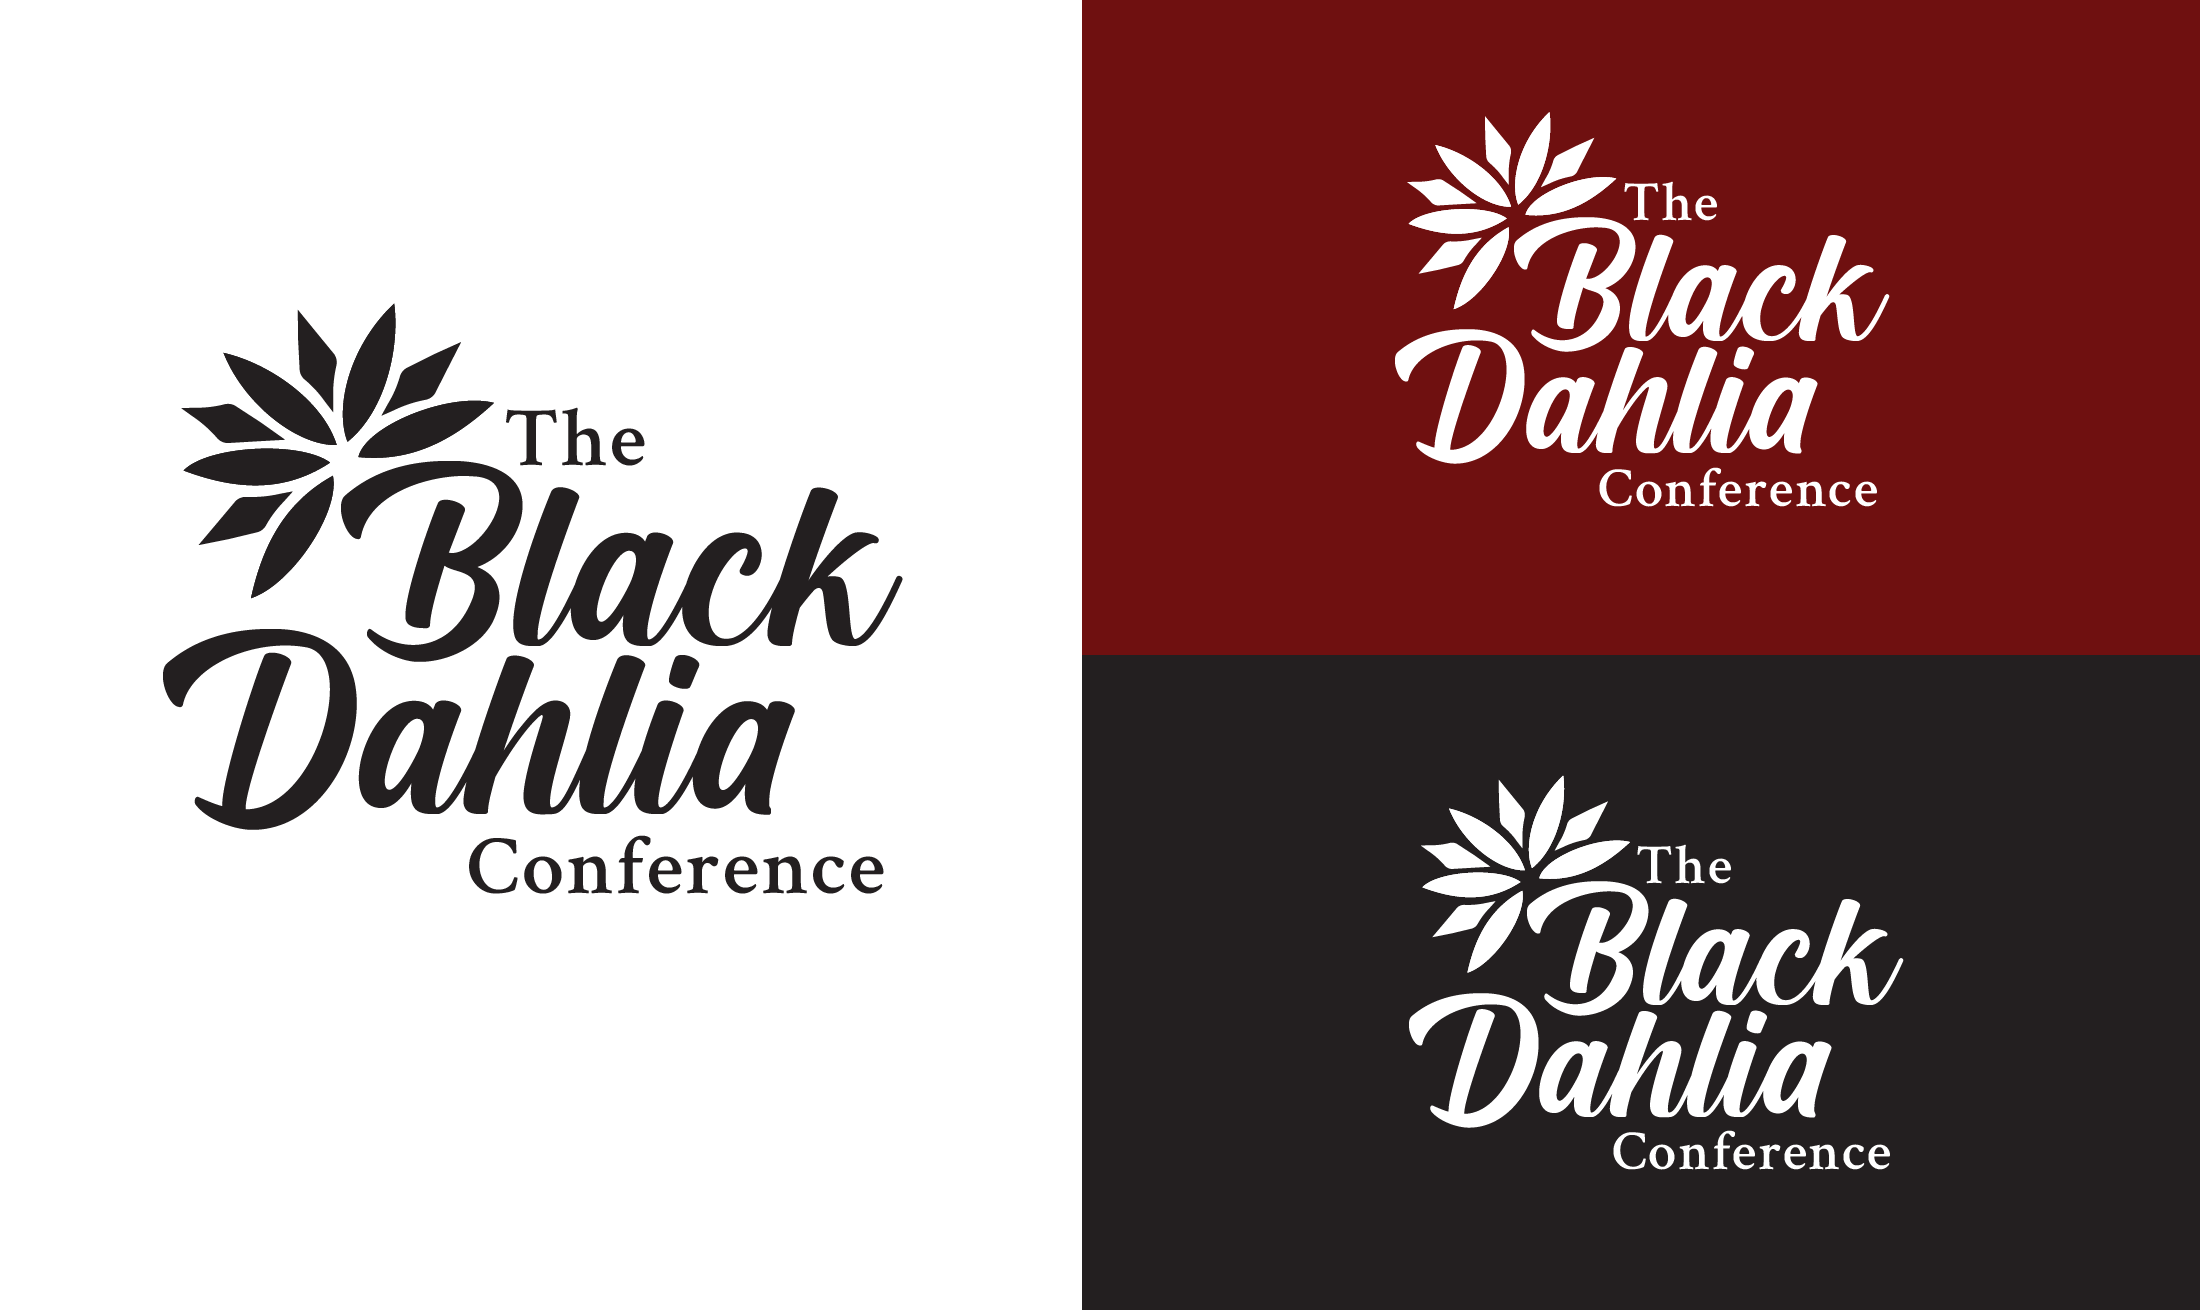 The Black Dahlia Conference - Image 5